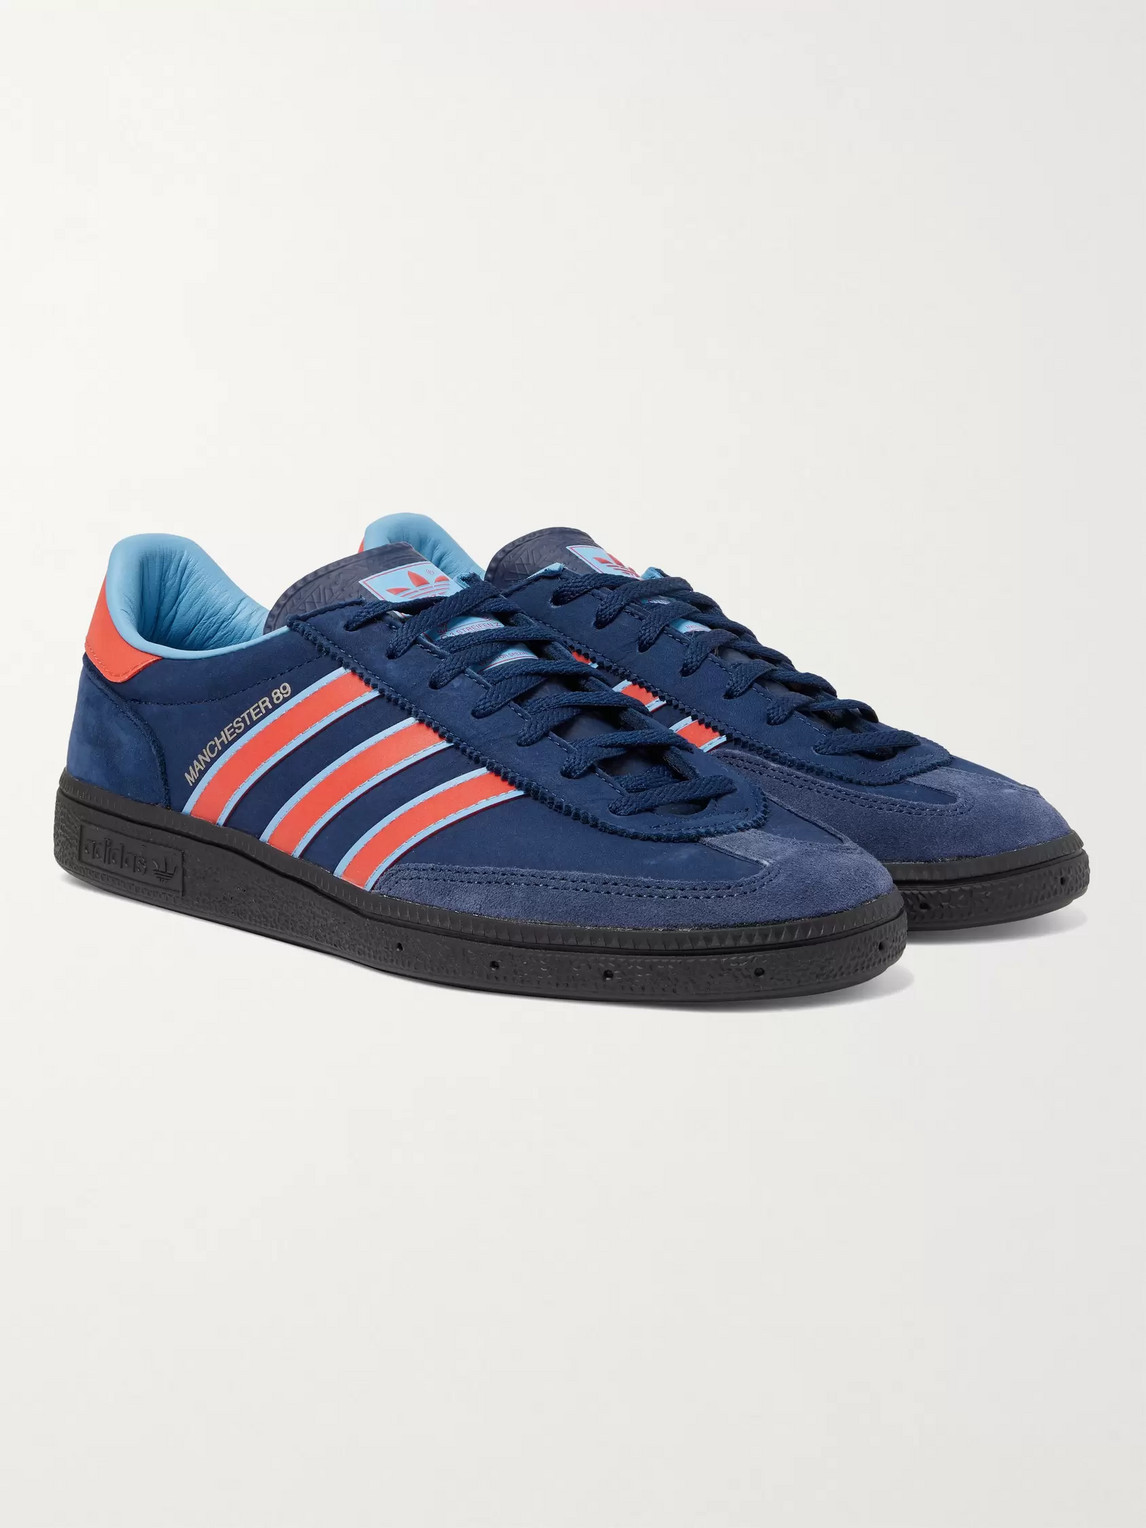 Adidas Consortium Spezial Manchester 89 Leather-trimmed Suede Sneakers In Blue